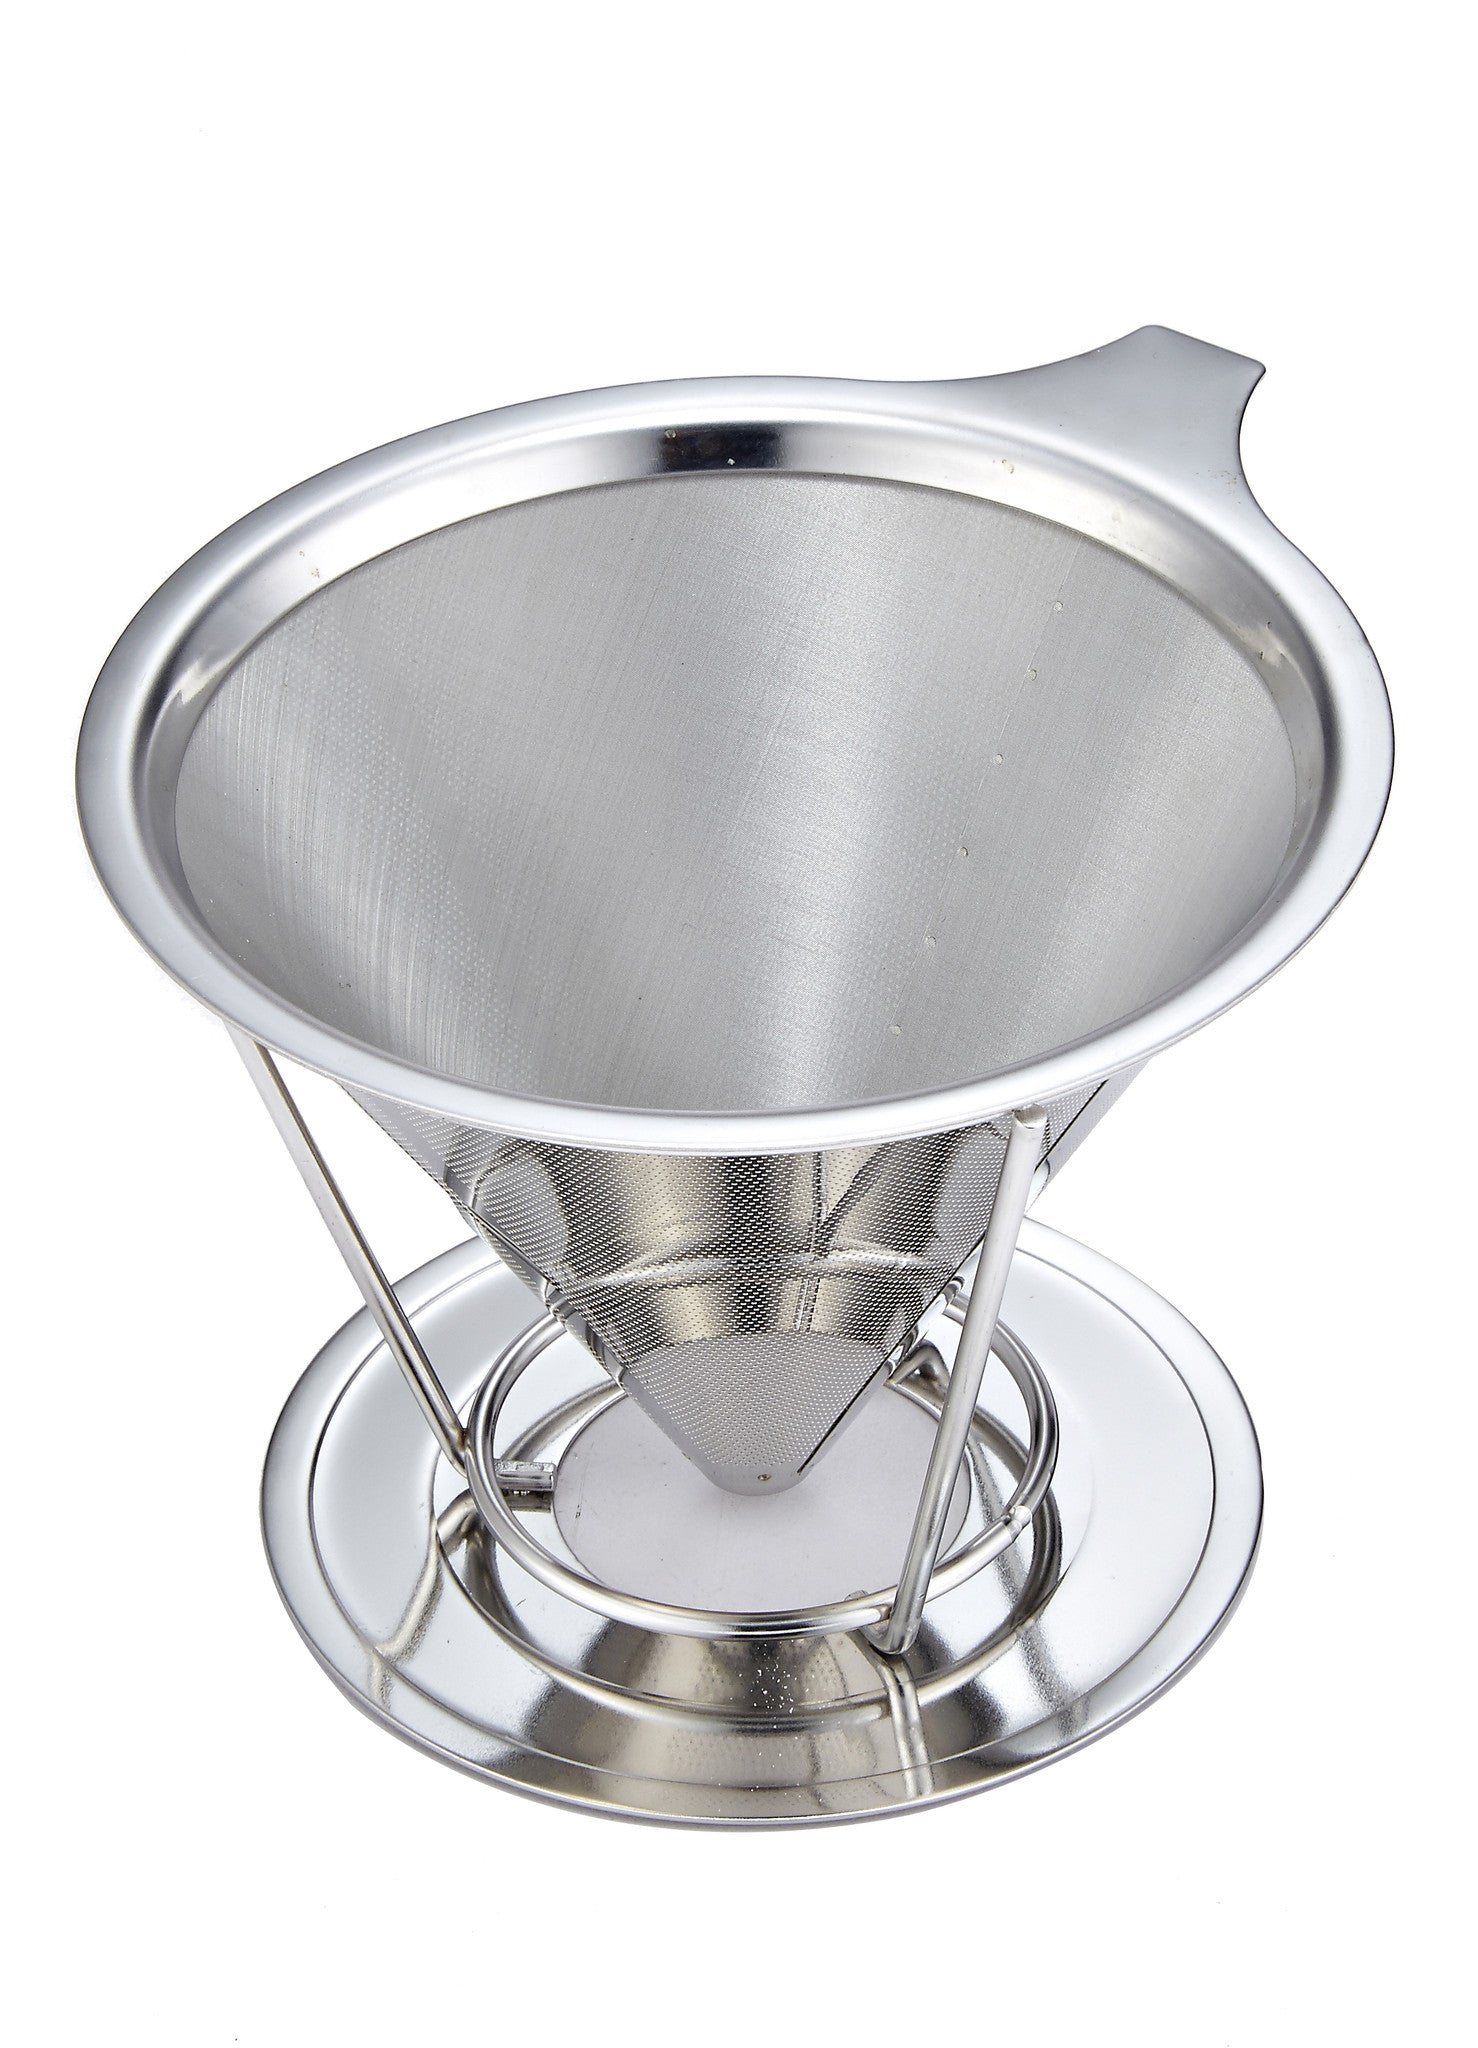 14 Ounce Pour Over Coffee Maker with Reusable Stainless Steel Filter Coffee